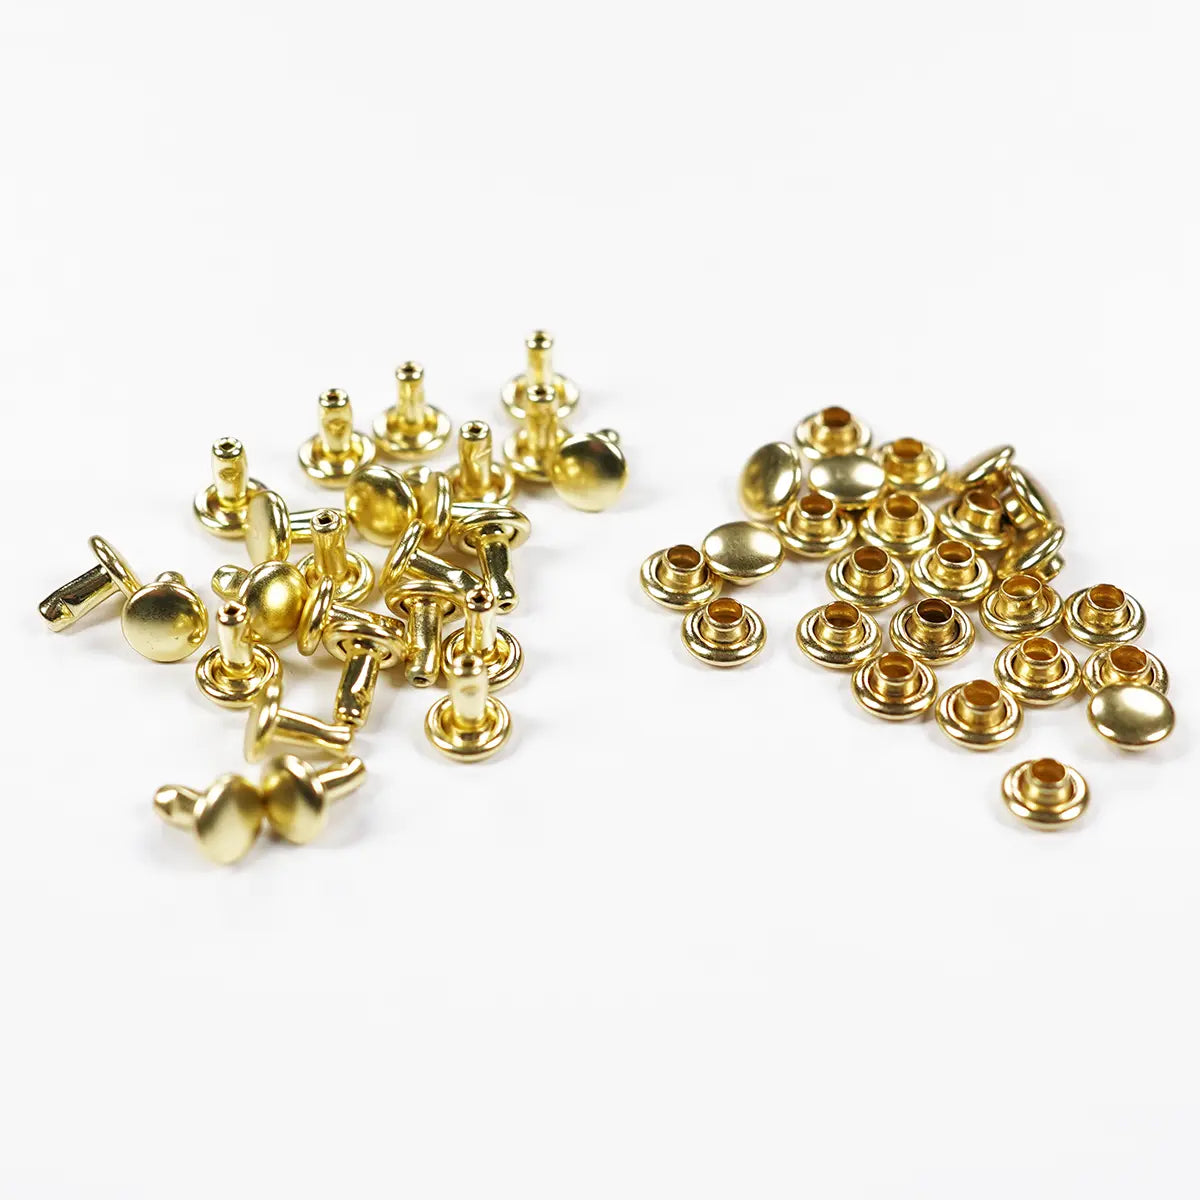 6mm x 6.4mm Solid Brass Double Cap Rivets 25 Pack